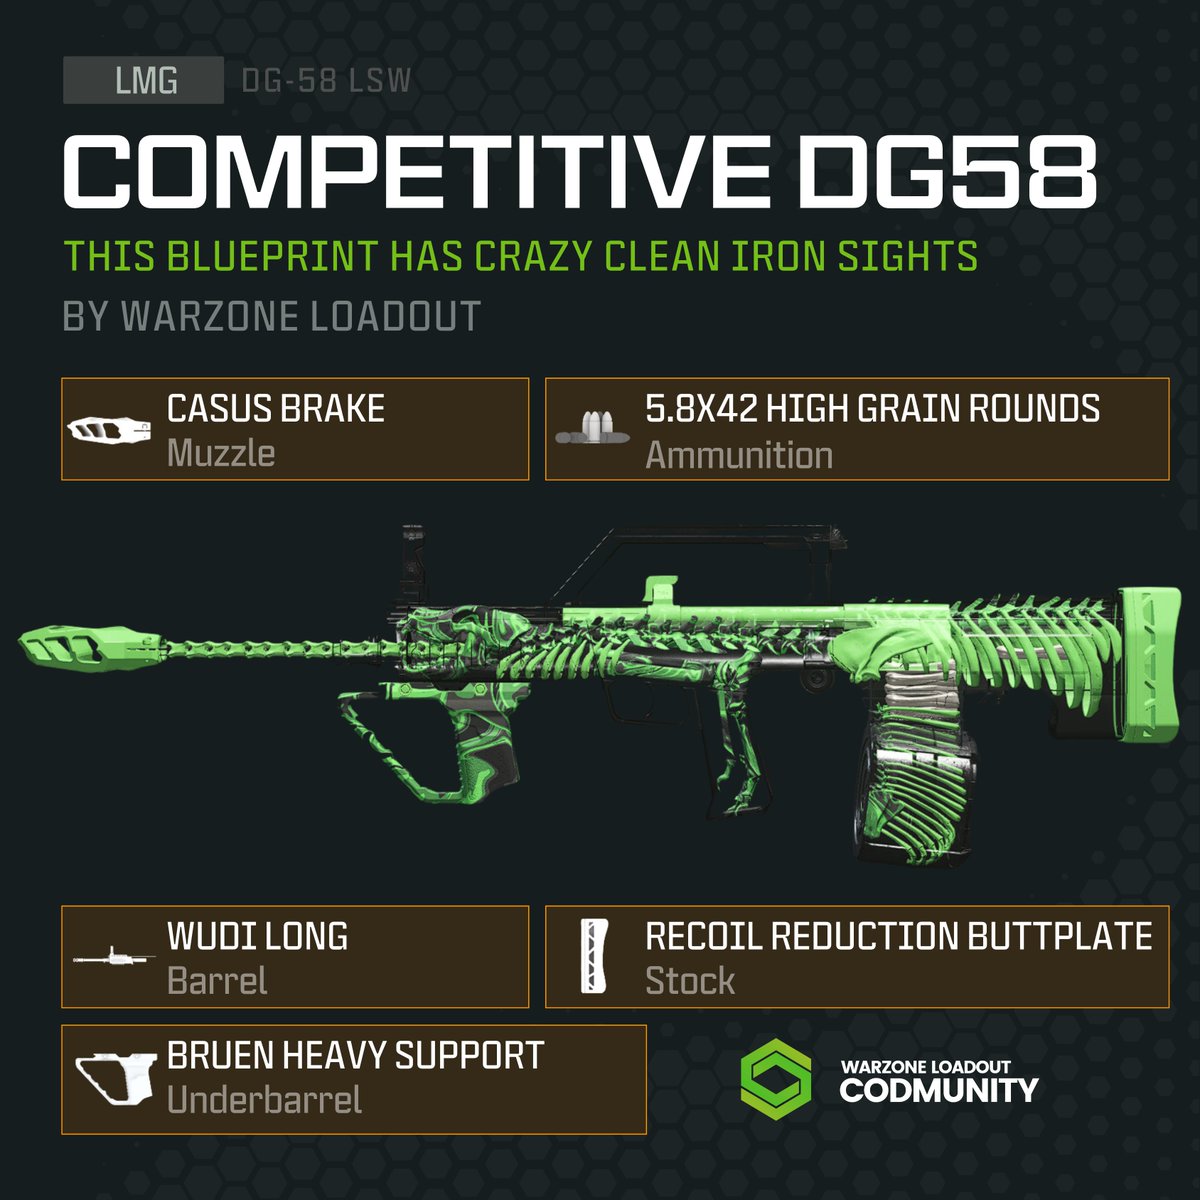 💰PAY TO WIN DG58💰 The blueprint 'Bone Structure' gives the best Iron Sights to this absolute beast! No need to waste an attachment for a scope; use high-grain ammo instead!